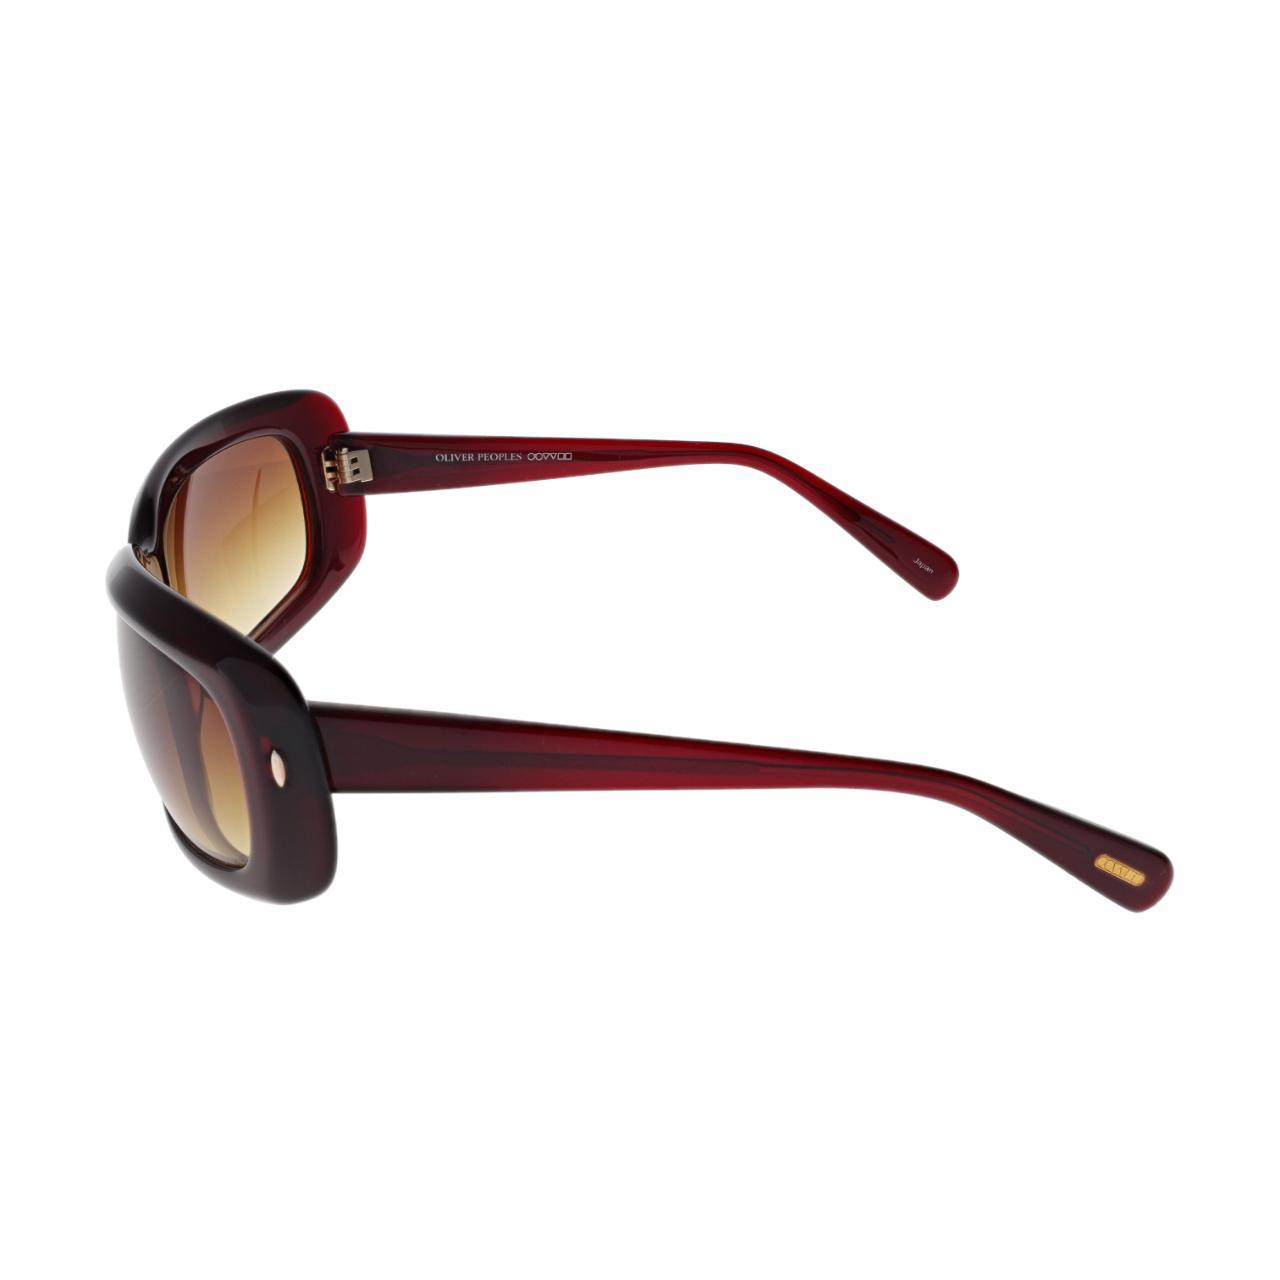 Product Image 3 - OLIVER PEOPLES INGENUE SUNGLASSES

Oliver Peoples